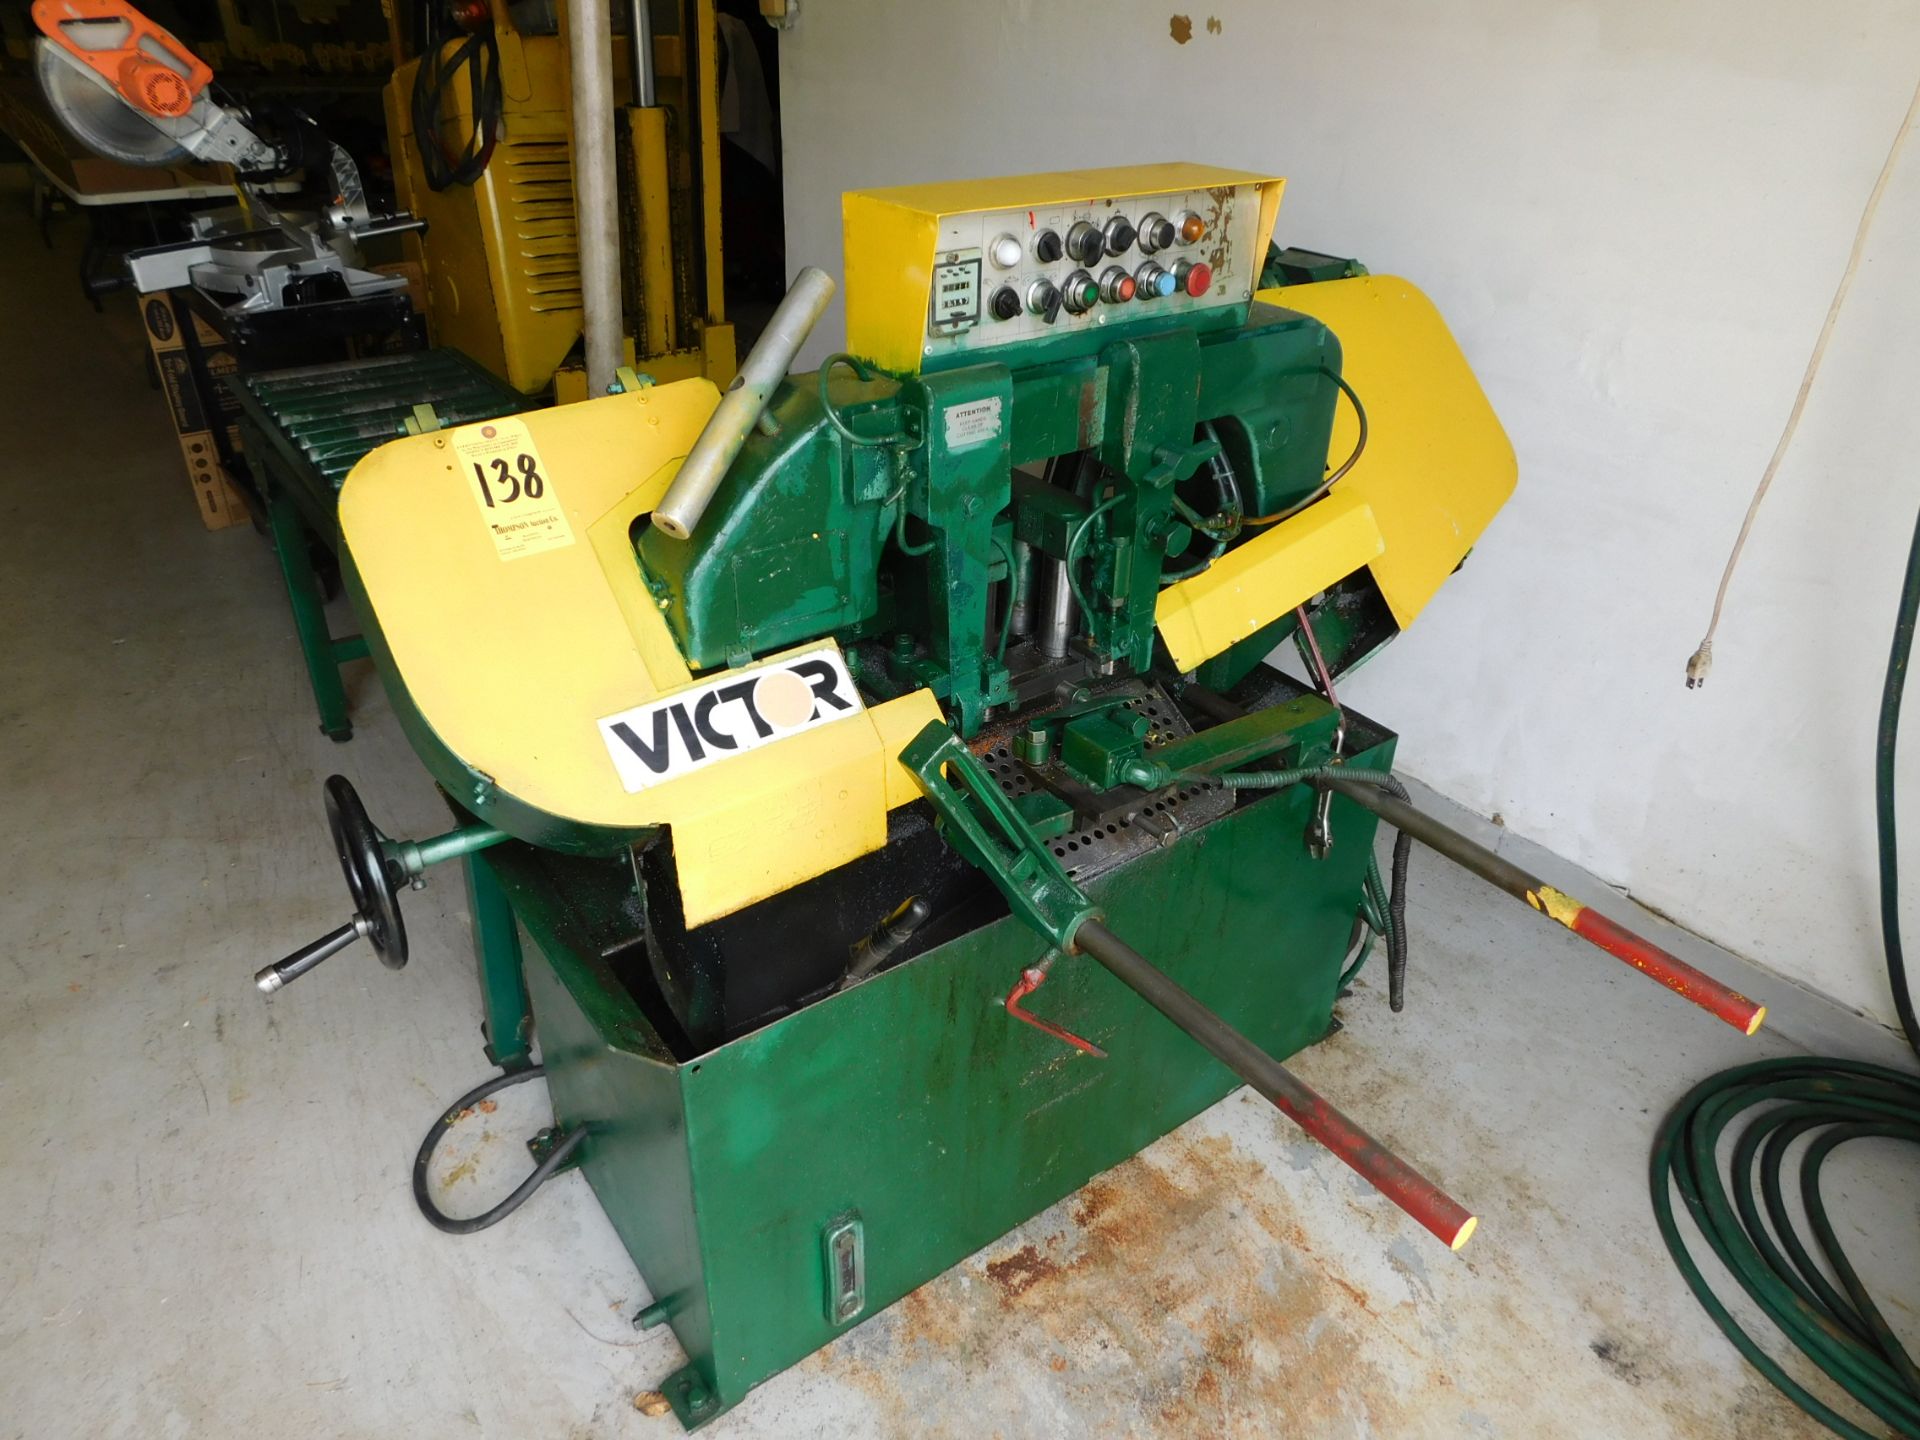 Victor Model Auto - 10H Automatic Horizontal Band Saw, s/n C848118, 10" Round Capacity, Infeed - Image 3 of 9